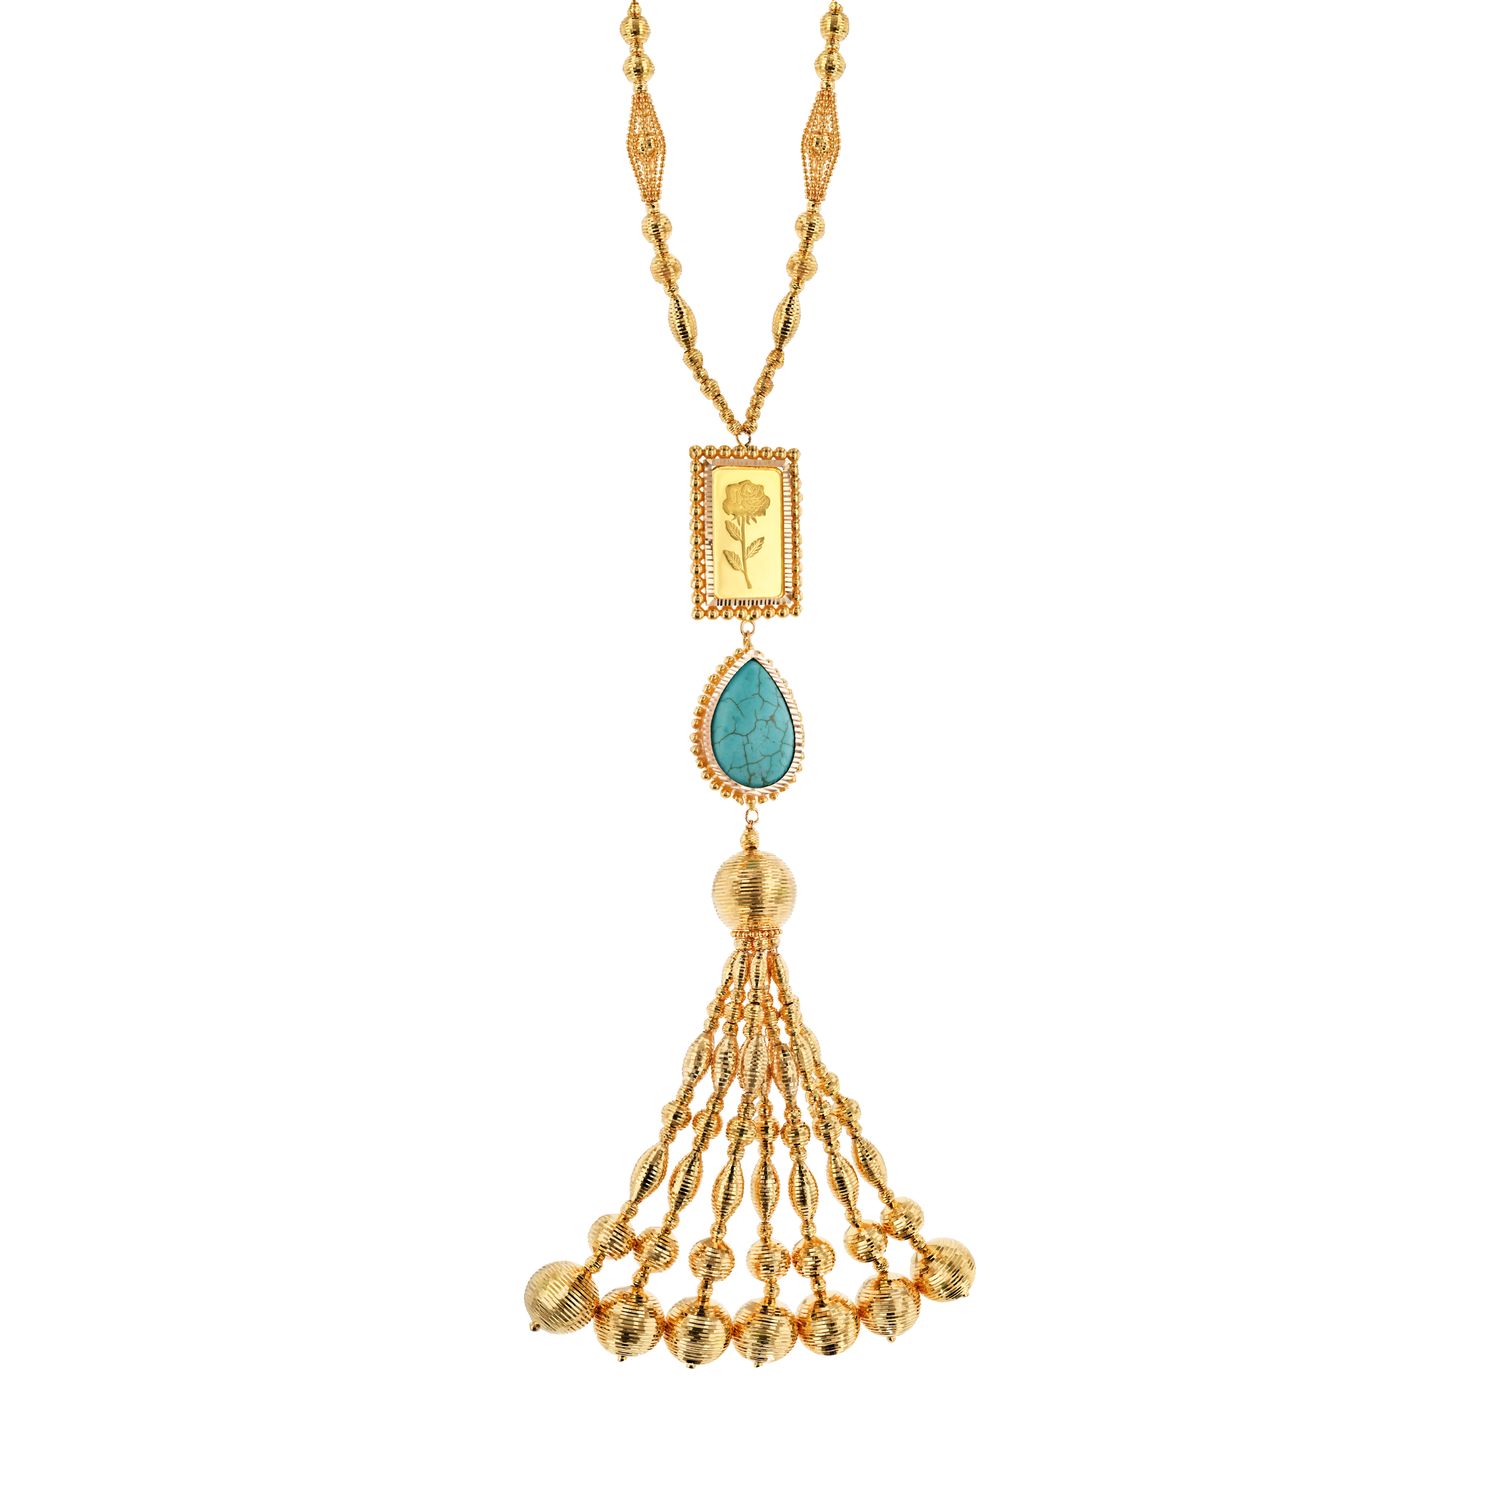 21K Traditional Gold Set With 24K Gold Bars and Turquoise Stone